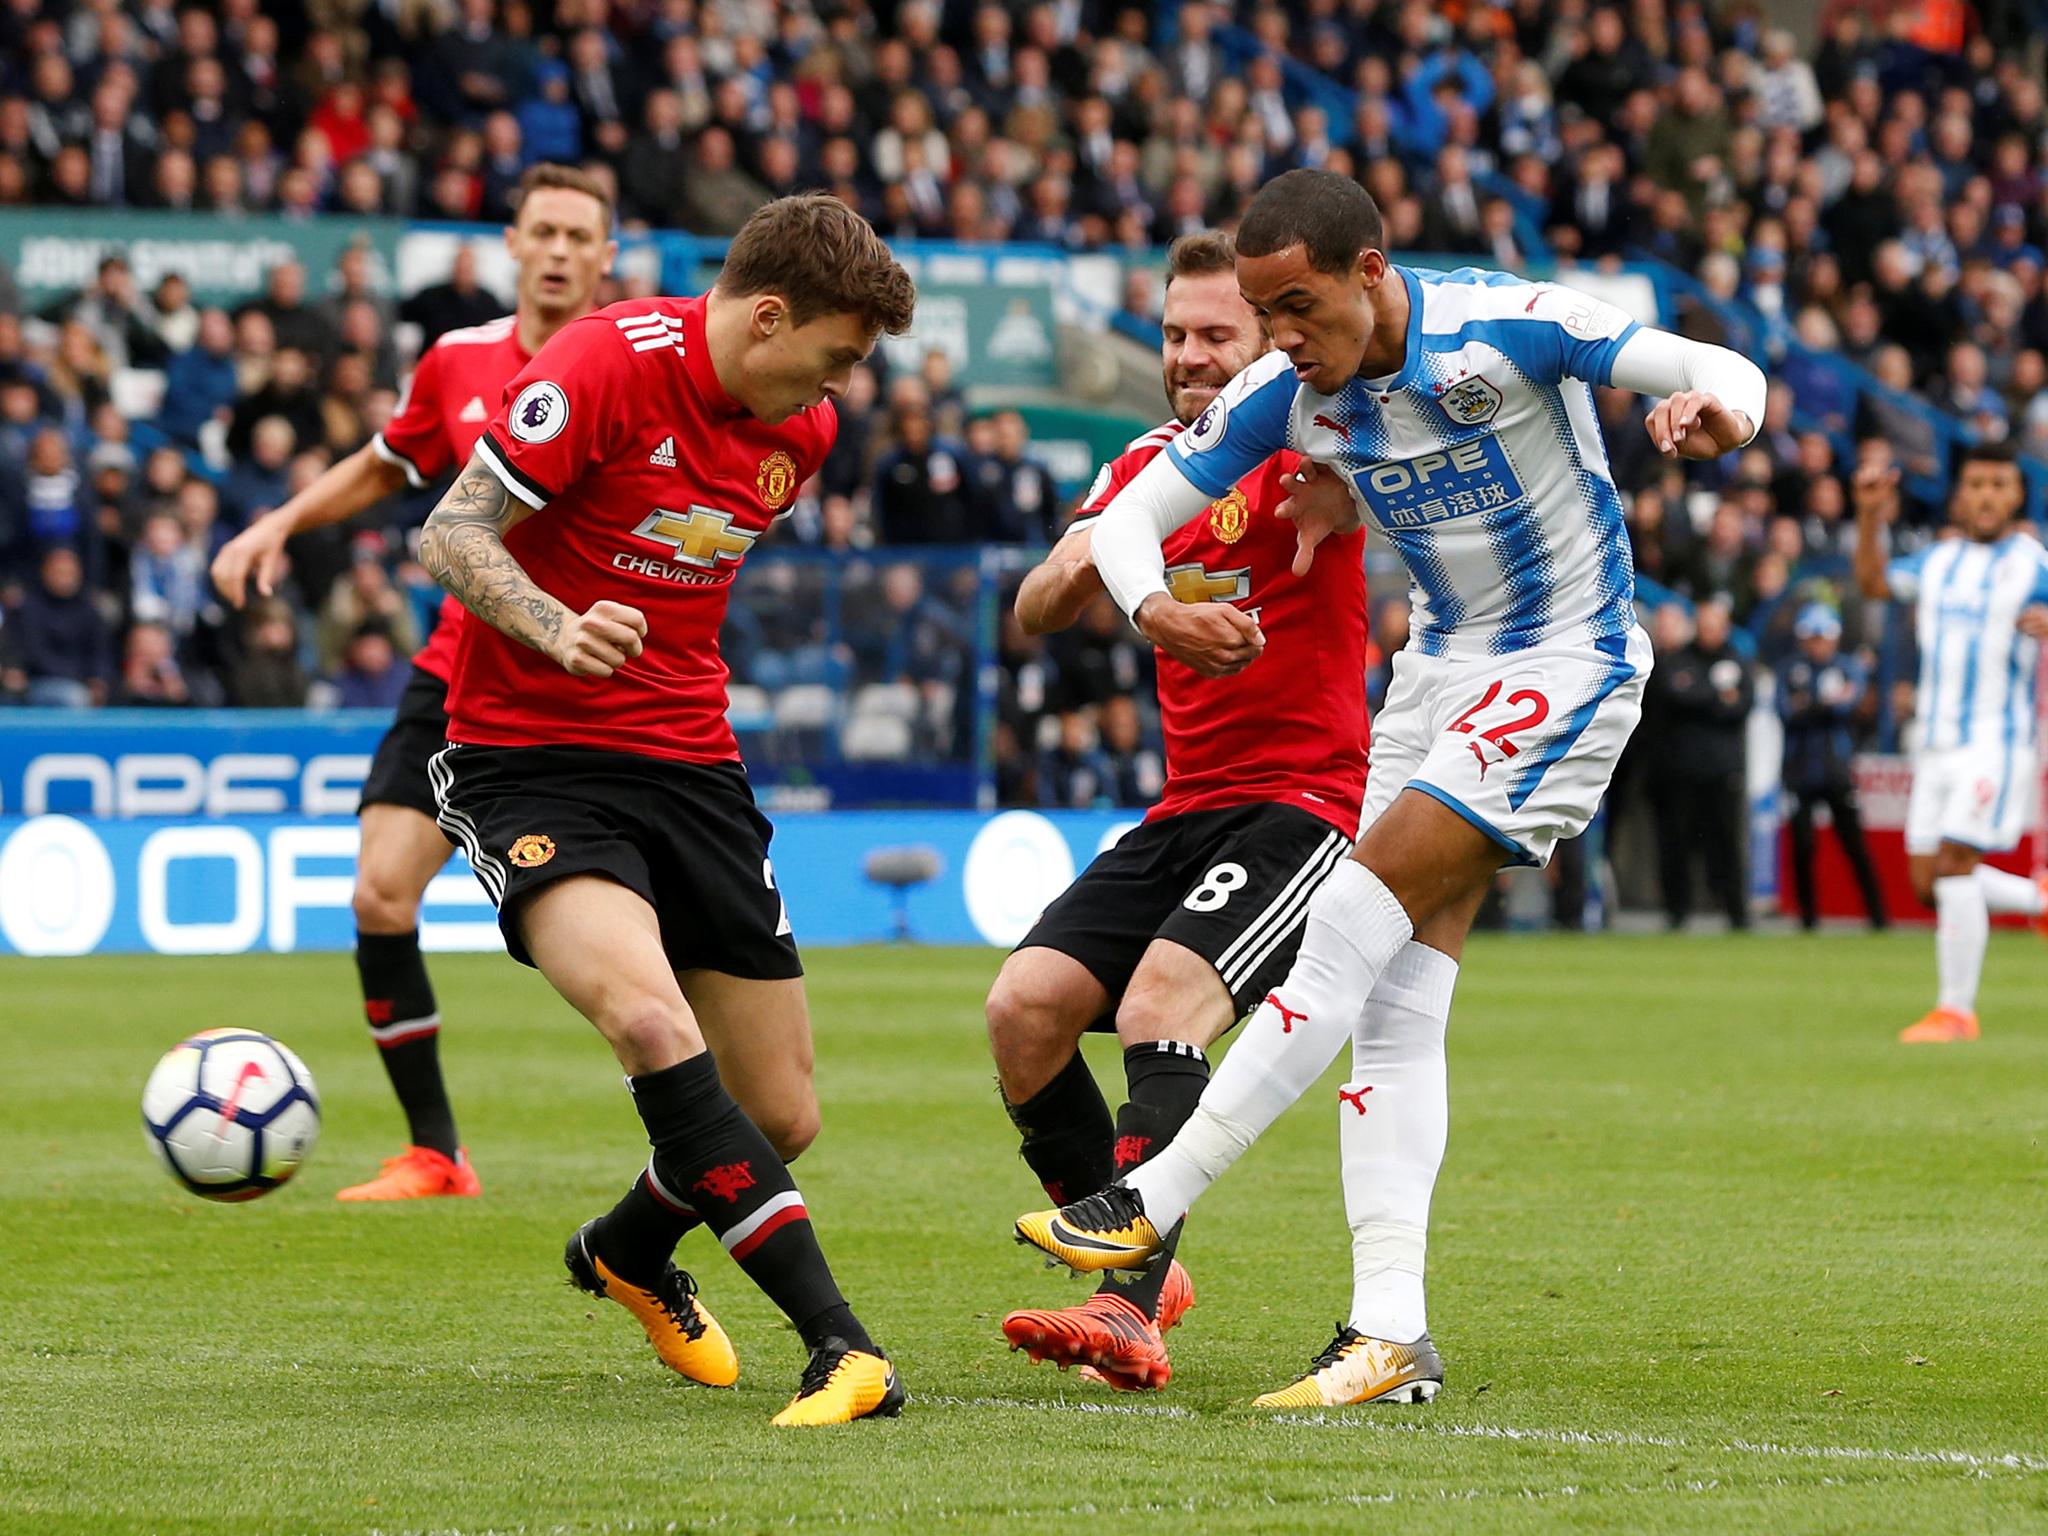 Victor Lindelof was criticised for his performance in Manchester United's 2-1 defeat by Huddersfield Town